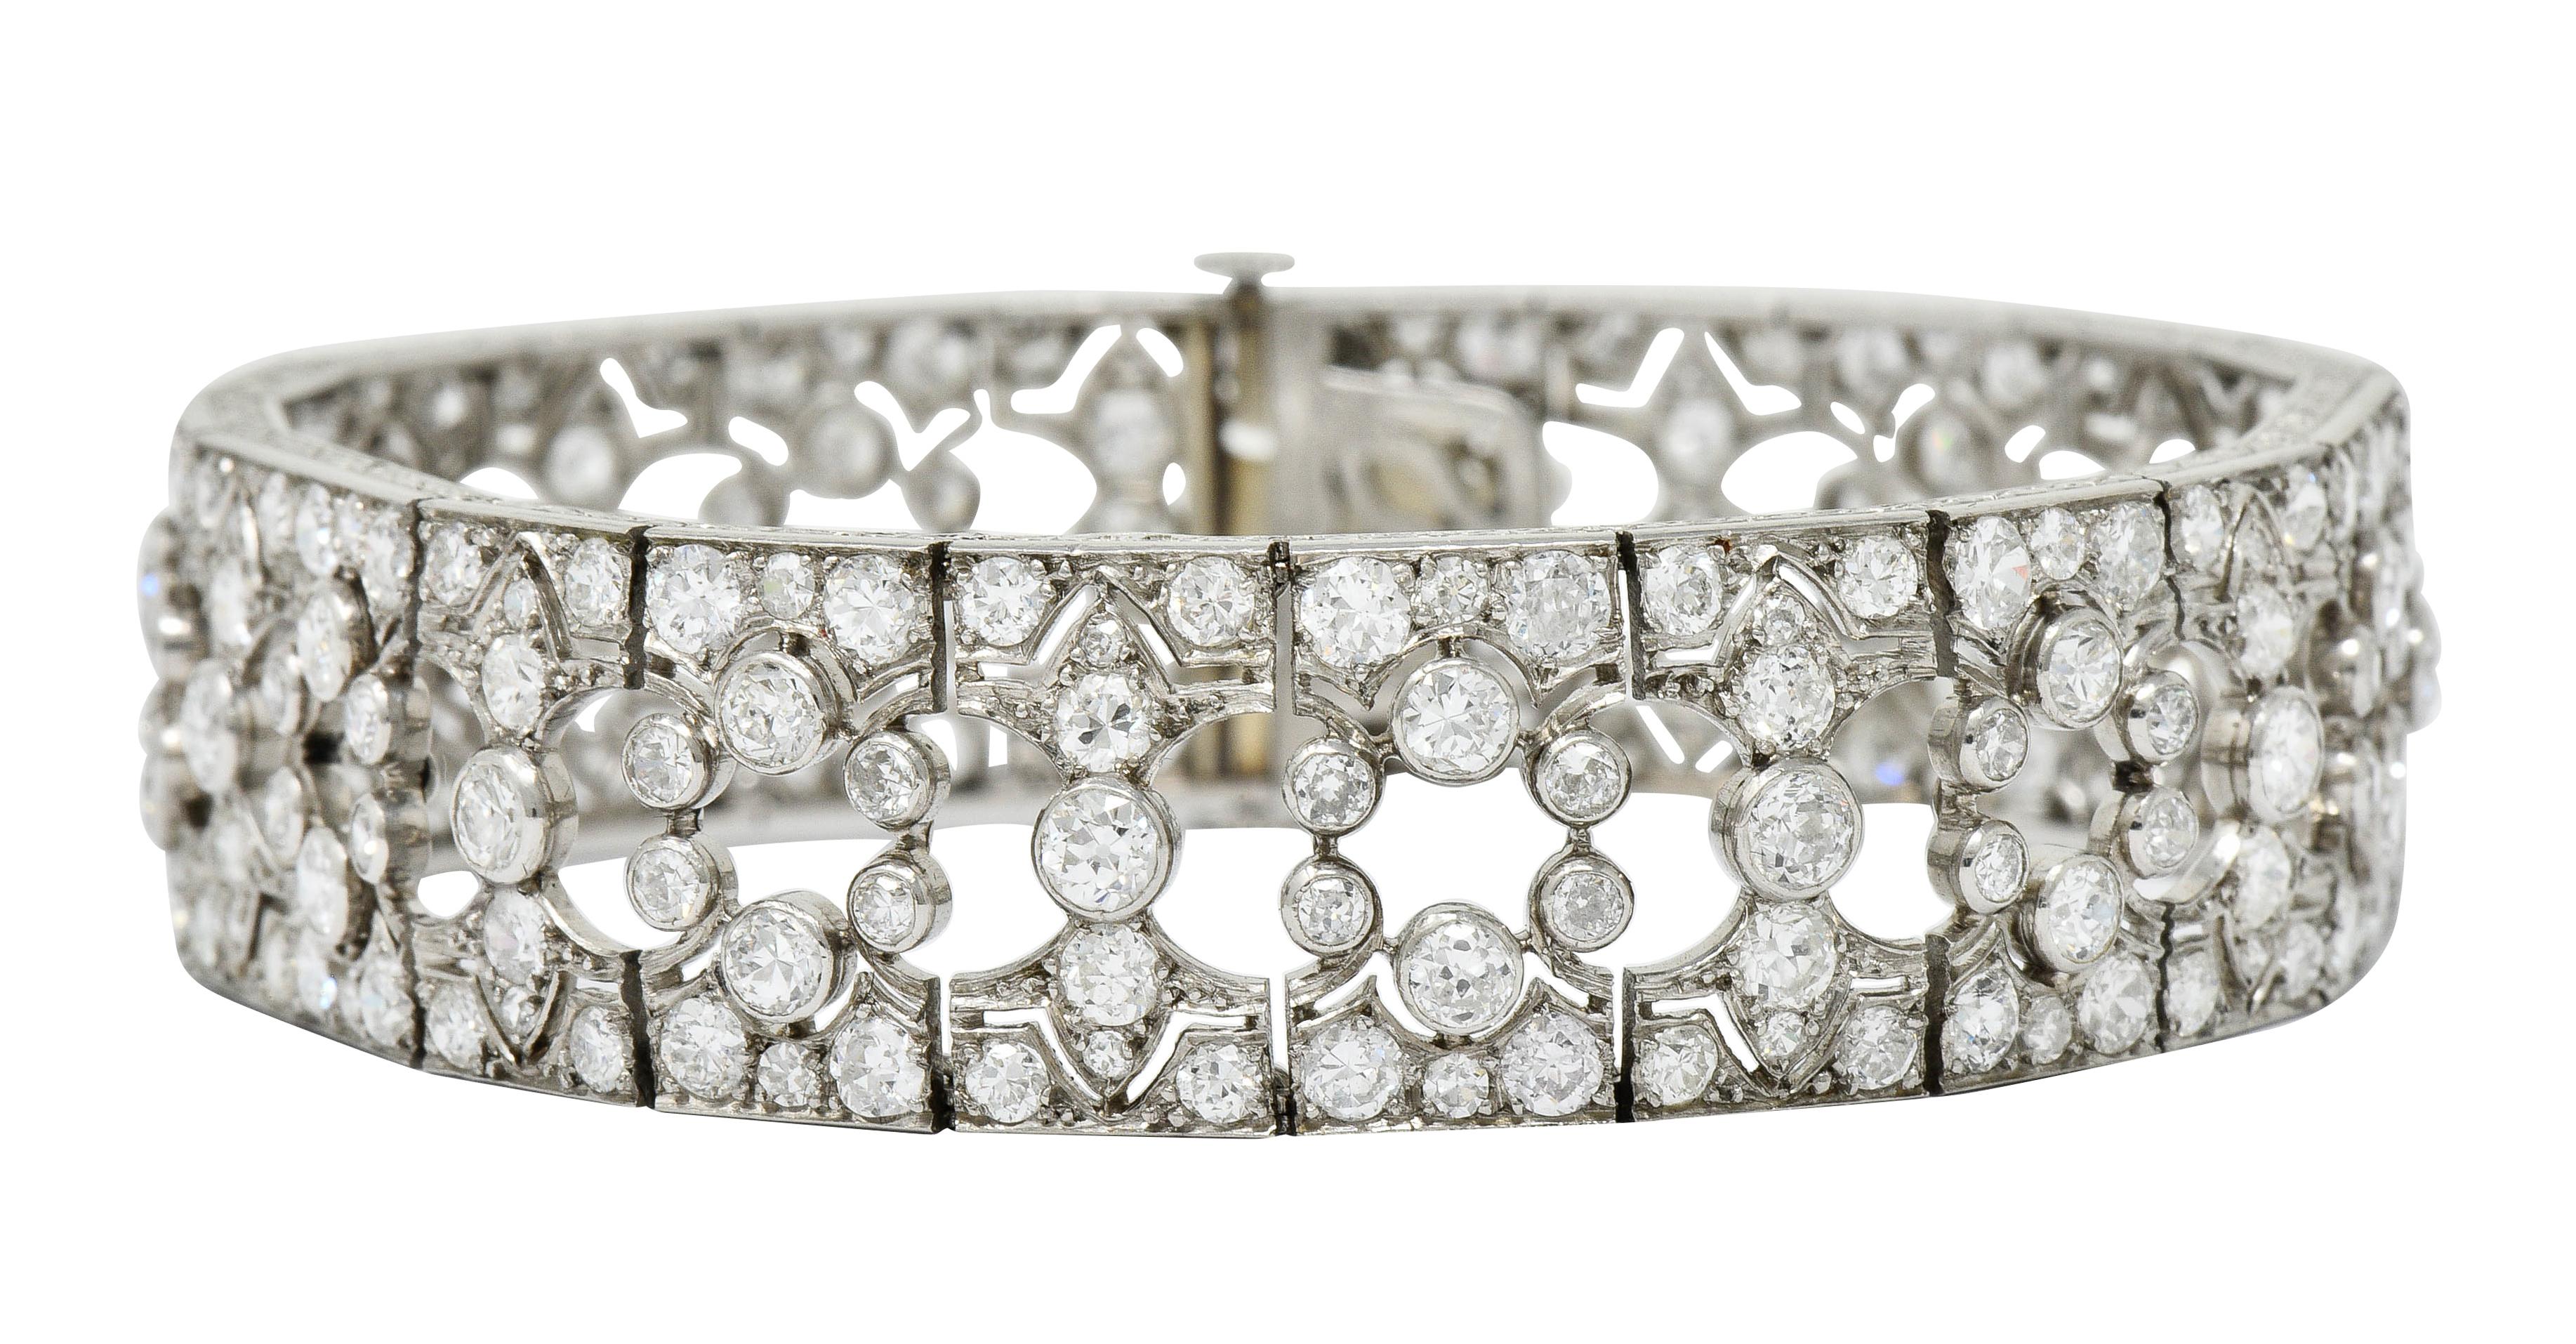 Wide bracelet comprised of pierced rectangular links featuring a fleur-de-lis design

Bead and bezel set throughout by old European, transitional, and single cut diamonds

Weighing in total approximately 12.50 carats with G to J color and VS to SI